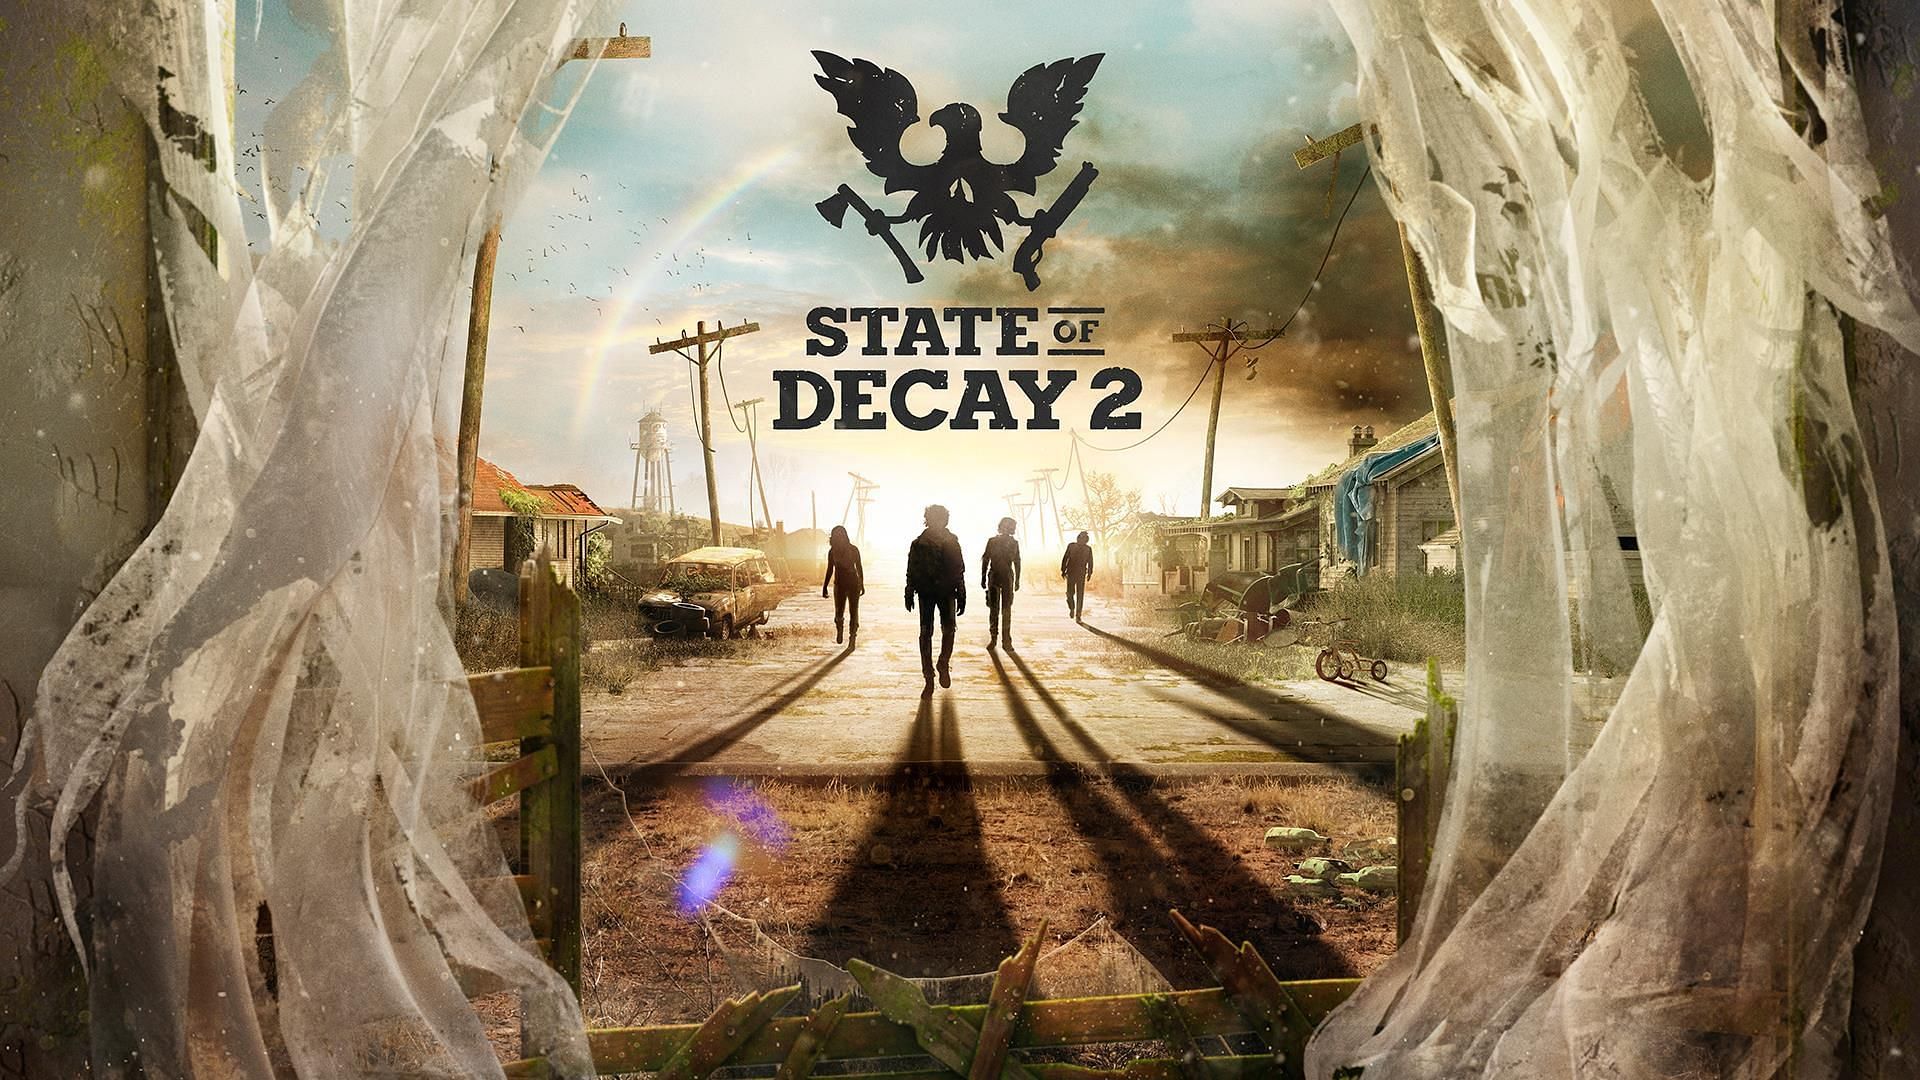 State of Decay 2 (Image via Xbox Game Pass)